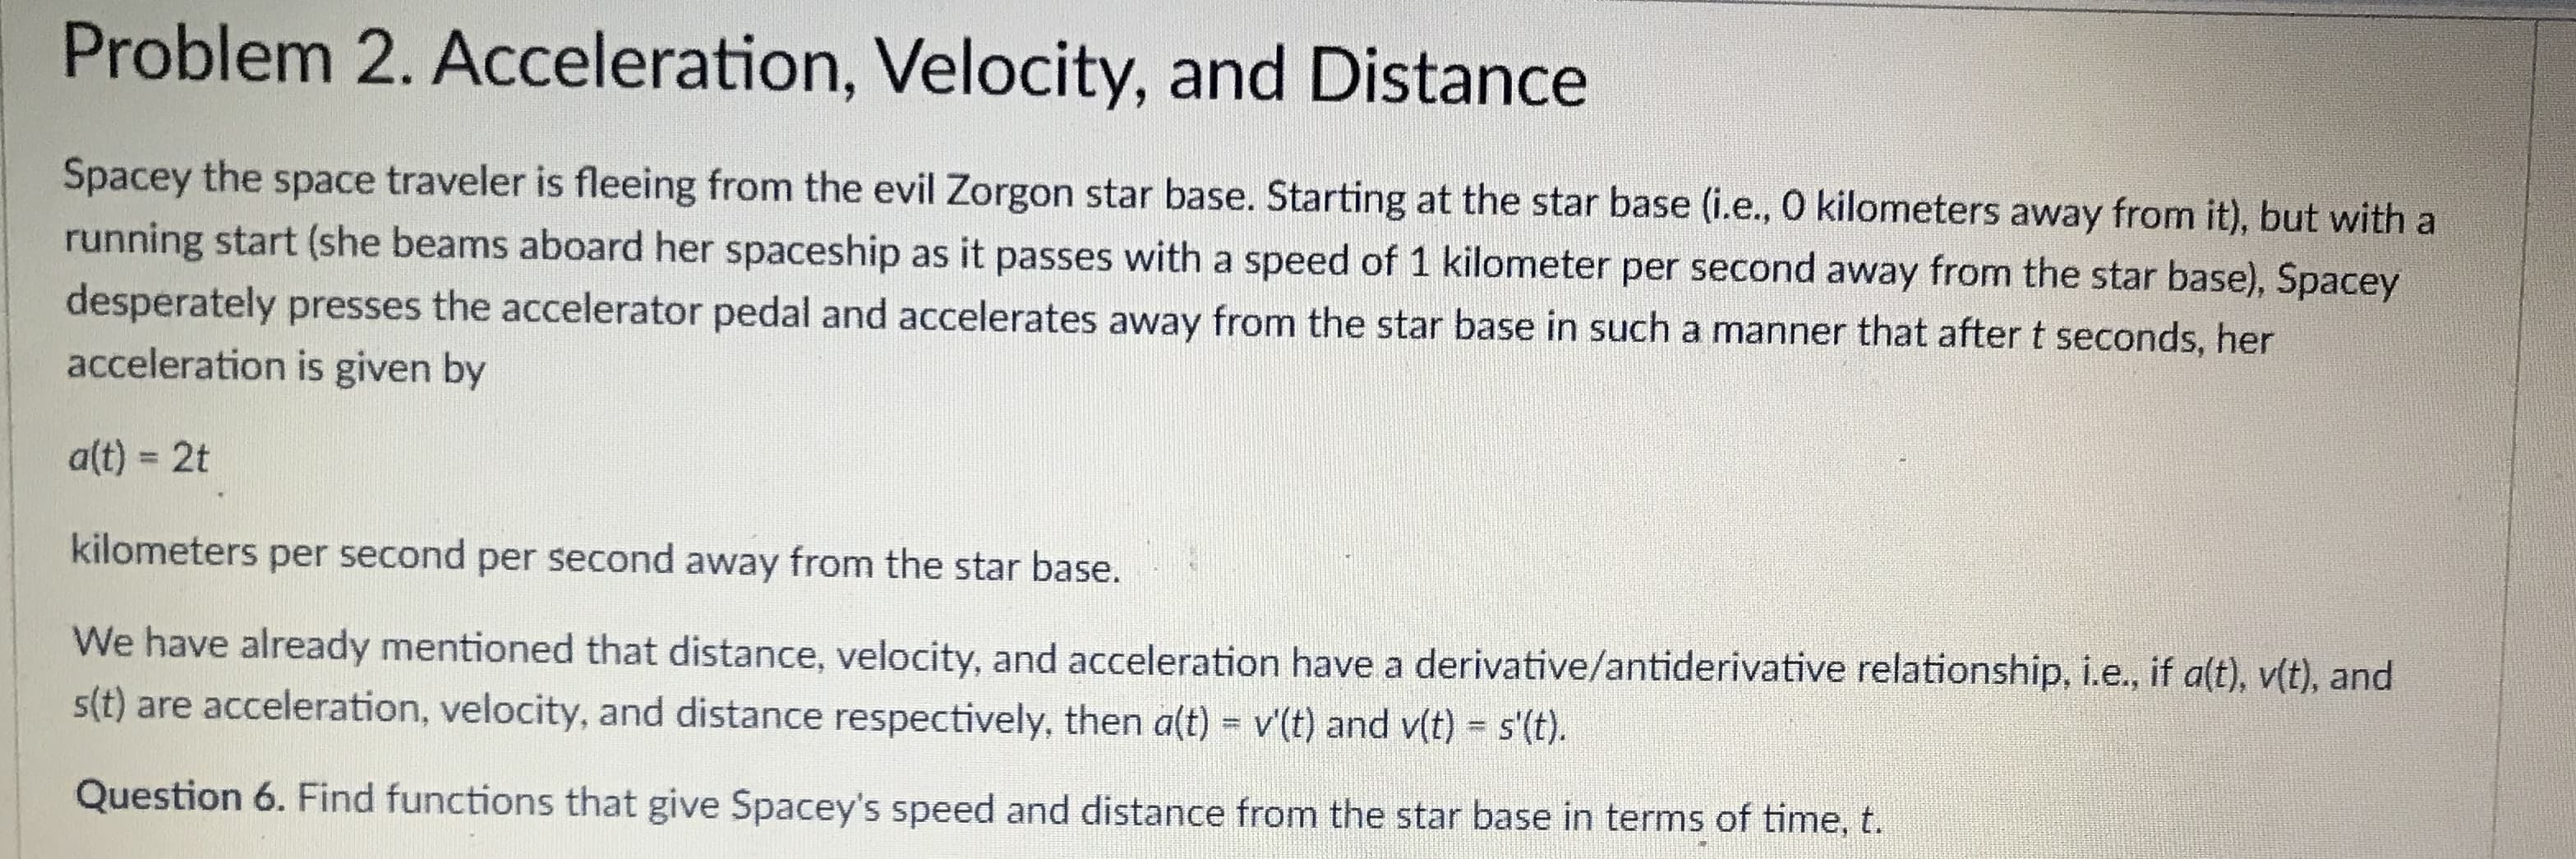 Problem 2. Acceleration, Velocity, and Distance
Spacey the space traveler is fleeing from the evil Zorgon star base. Starting at the star base (i.e., O kilometers away from it), but with a
running start (she beams aboard h
desperately presses the accelerator pedal and accelerates away from the star base in such a manner that after t seconds, her
acceleration is given by
er spaceship as it passes with a speed of 1 kilometer per second away from the star base), Spacey
alt) - 2t
kilometers per second per second away from the star base.
We have already mentioned that distance, velocity, and acceleration
st) are acceleration, velocity, and distance respectively, then aft) - vt) and v(t)-st.
Question 6. Find functions that give Spacey's speed and distance from the star base in terms of time, t.
have a derivative/antiderivative relationship, i.e, if alt), vit), and
